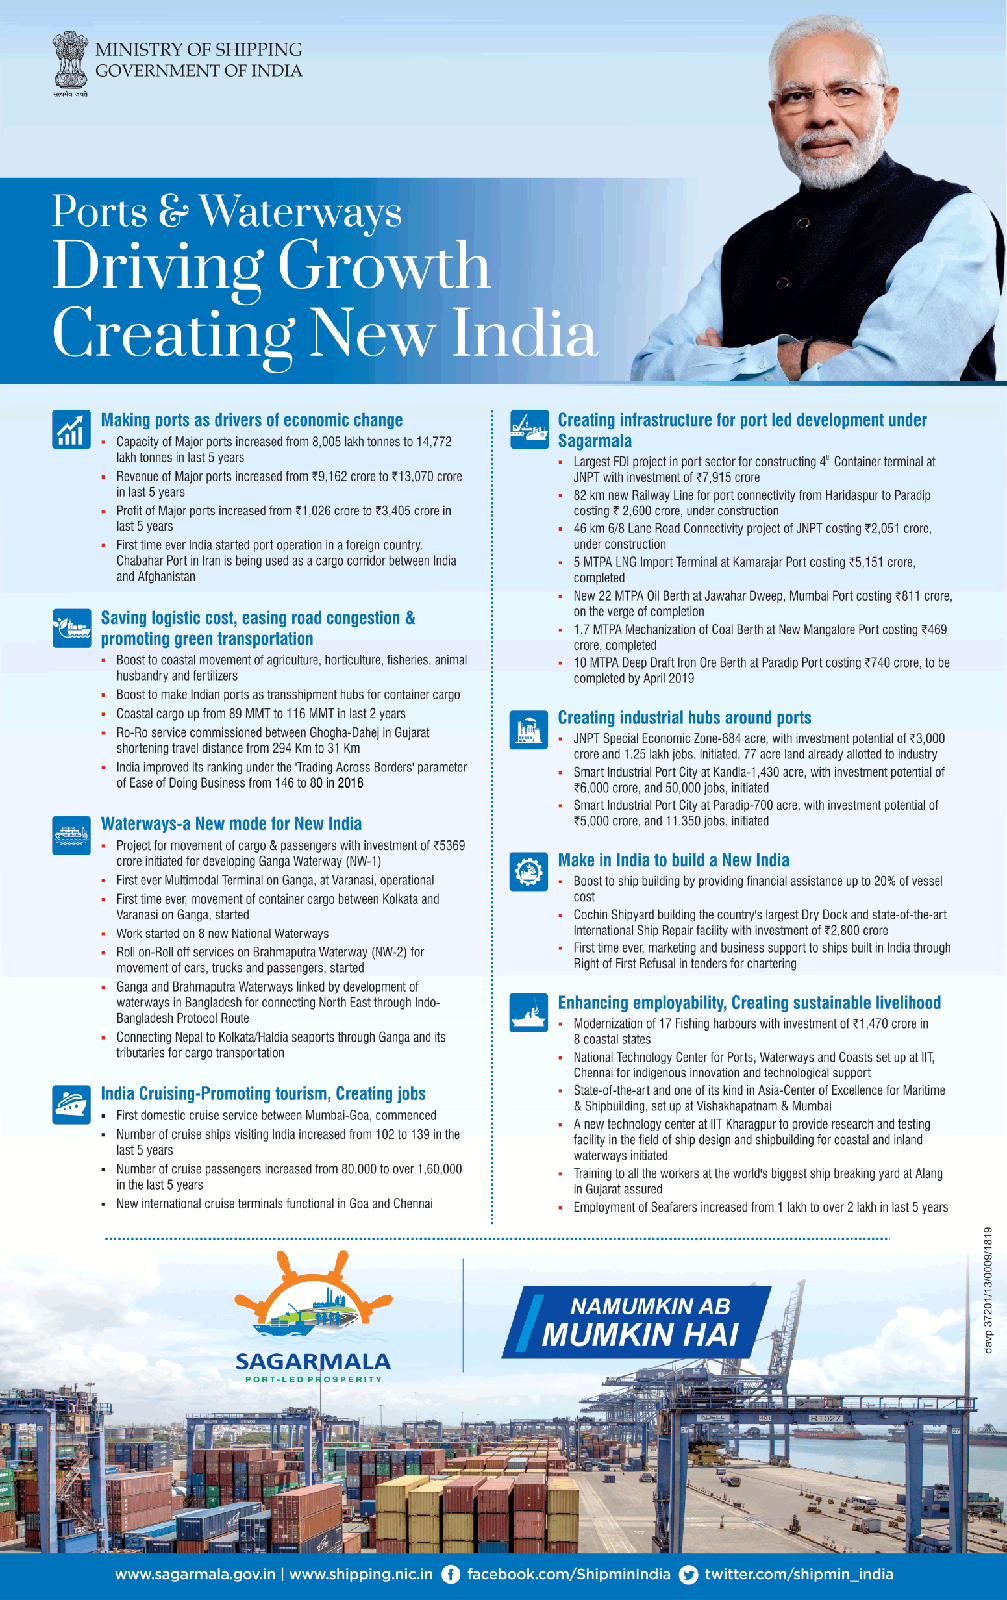 ministry-of-shipping-ports-and-waterways-driving-growth-greating-new-india-ad-times-of-india-delhi-07-03-2019.png